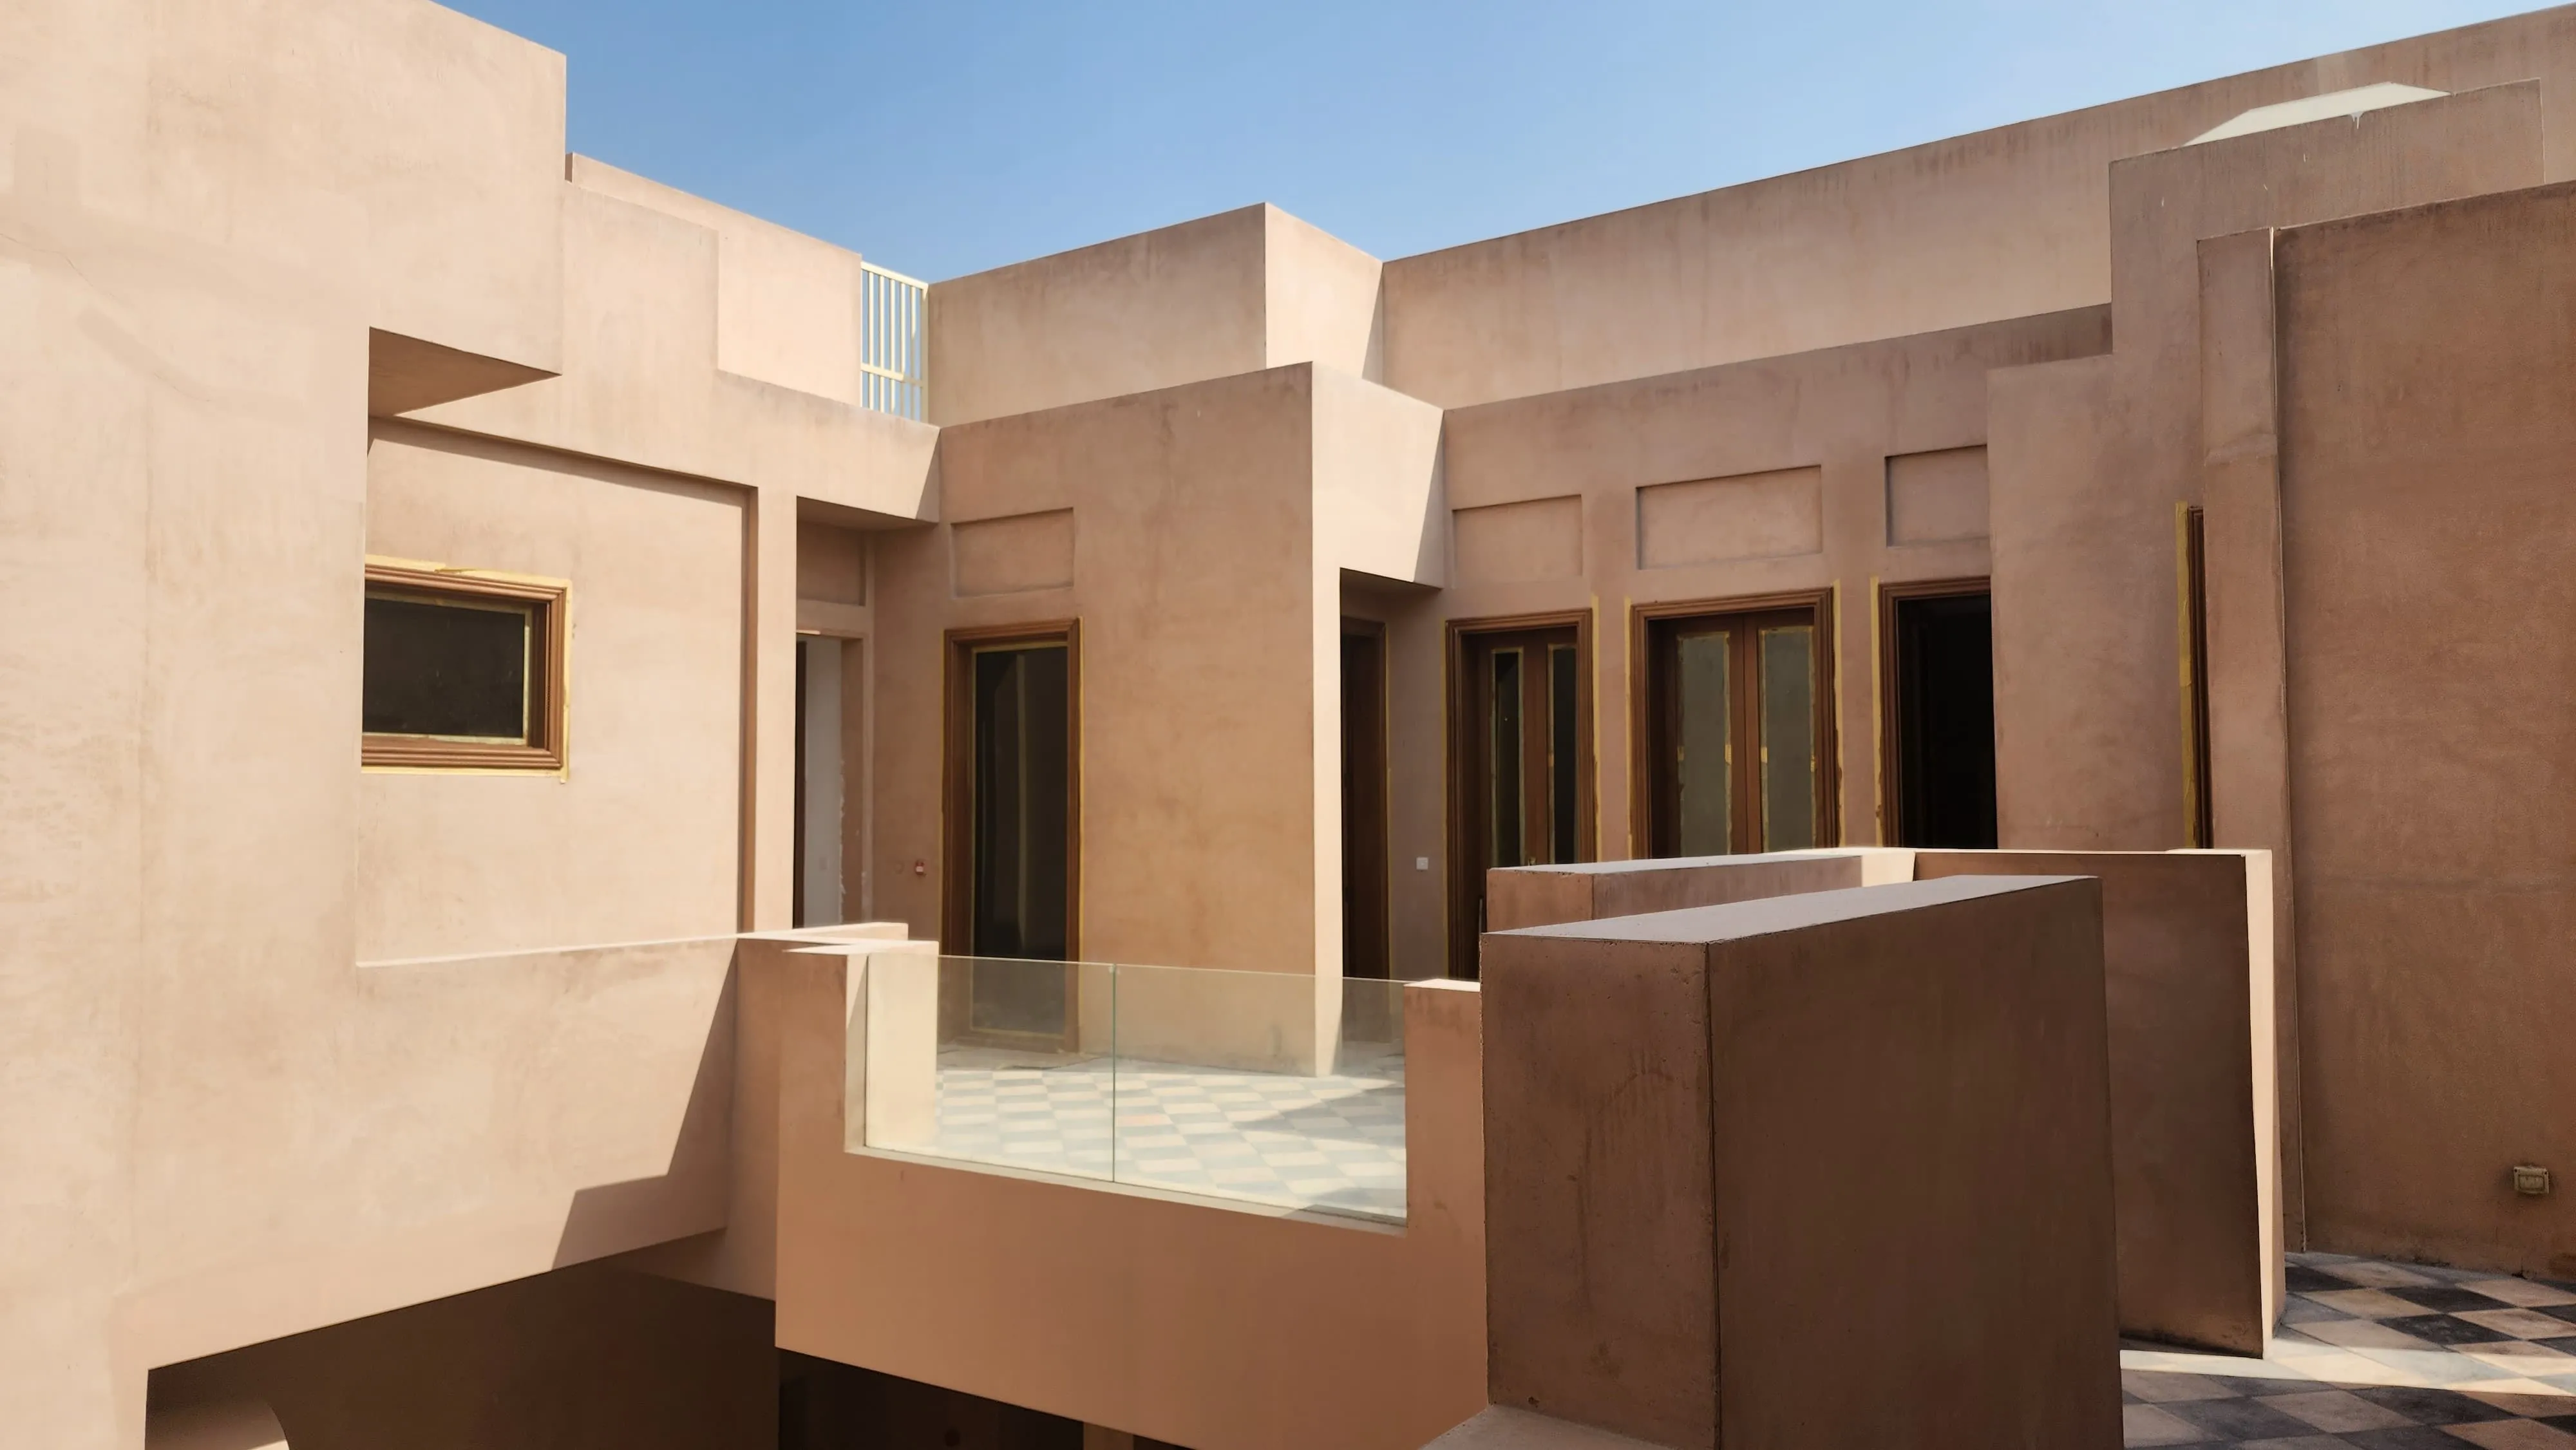 A tranquil courtyard with tan concrete, creating a warm and welcoming atmosphere.